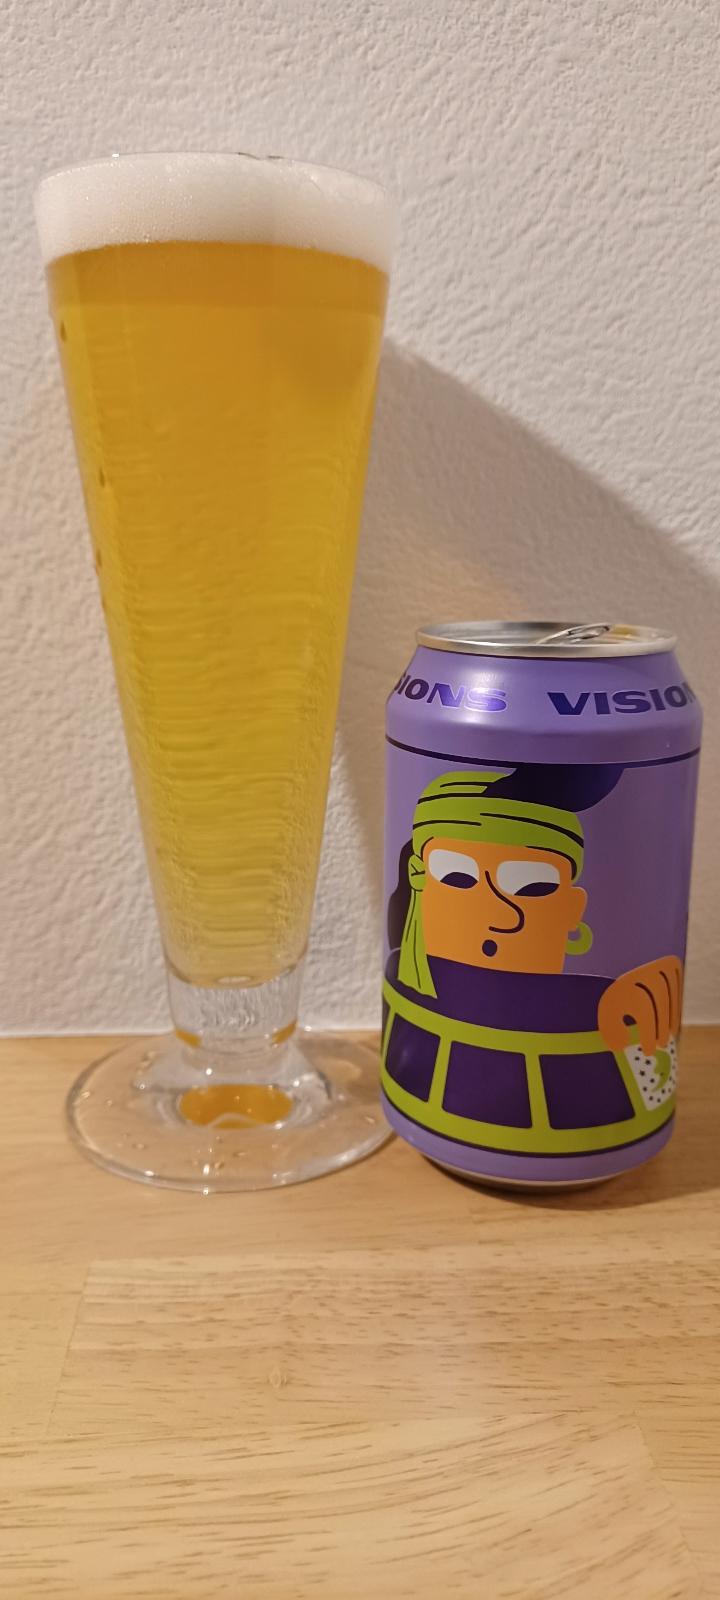 Visions Lager